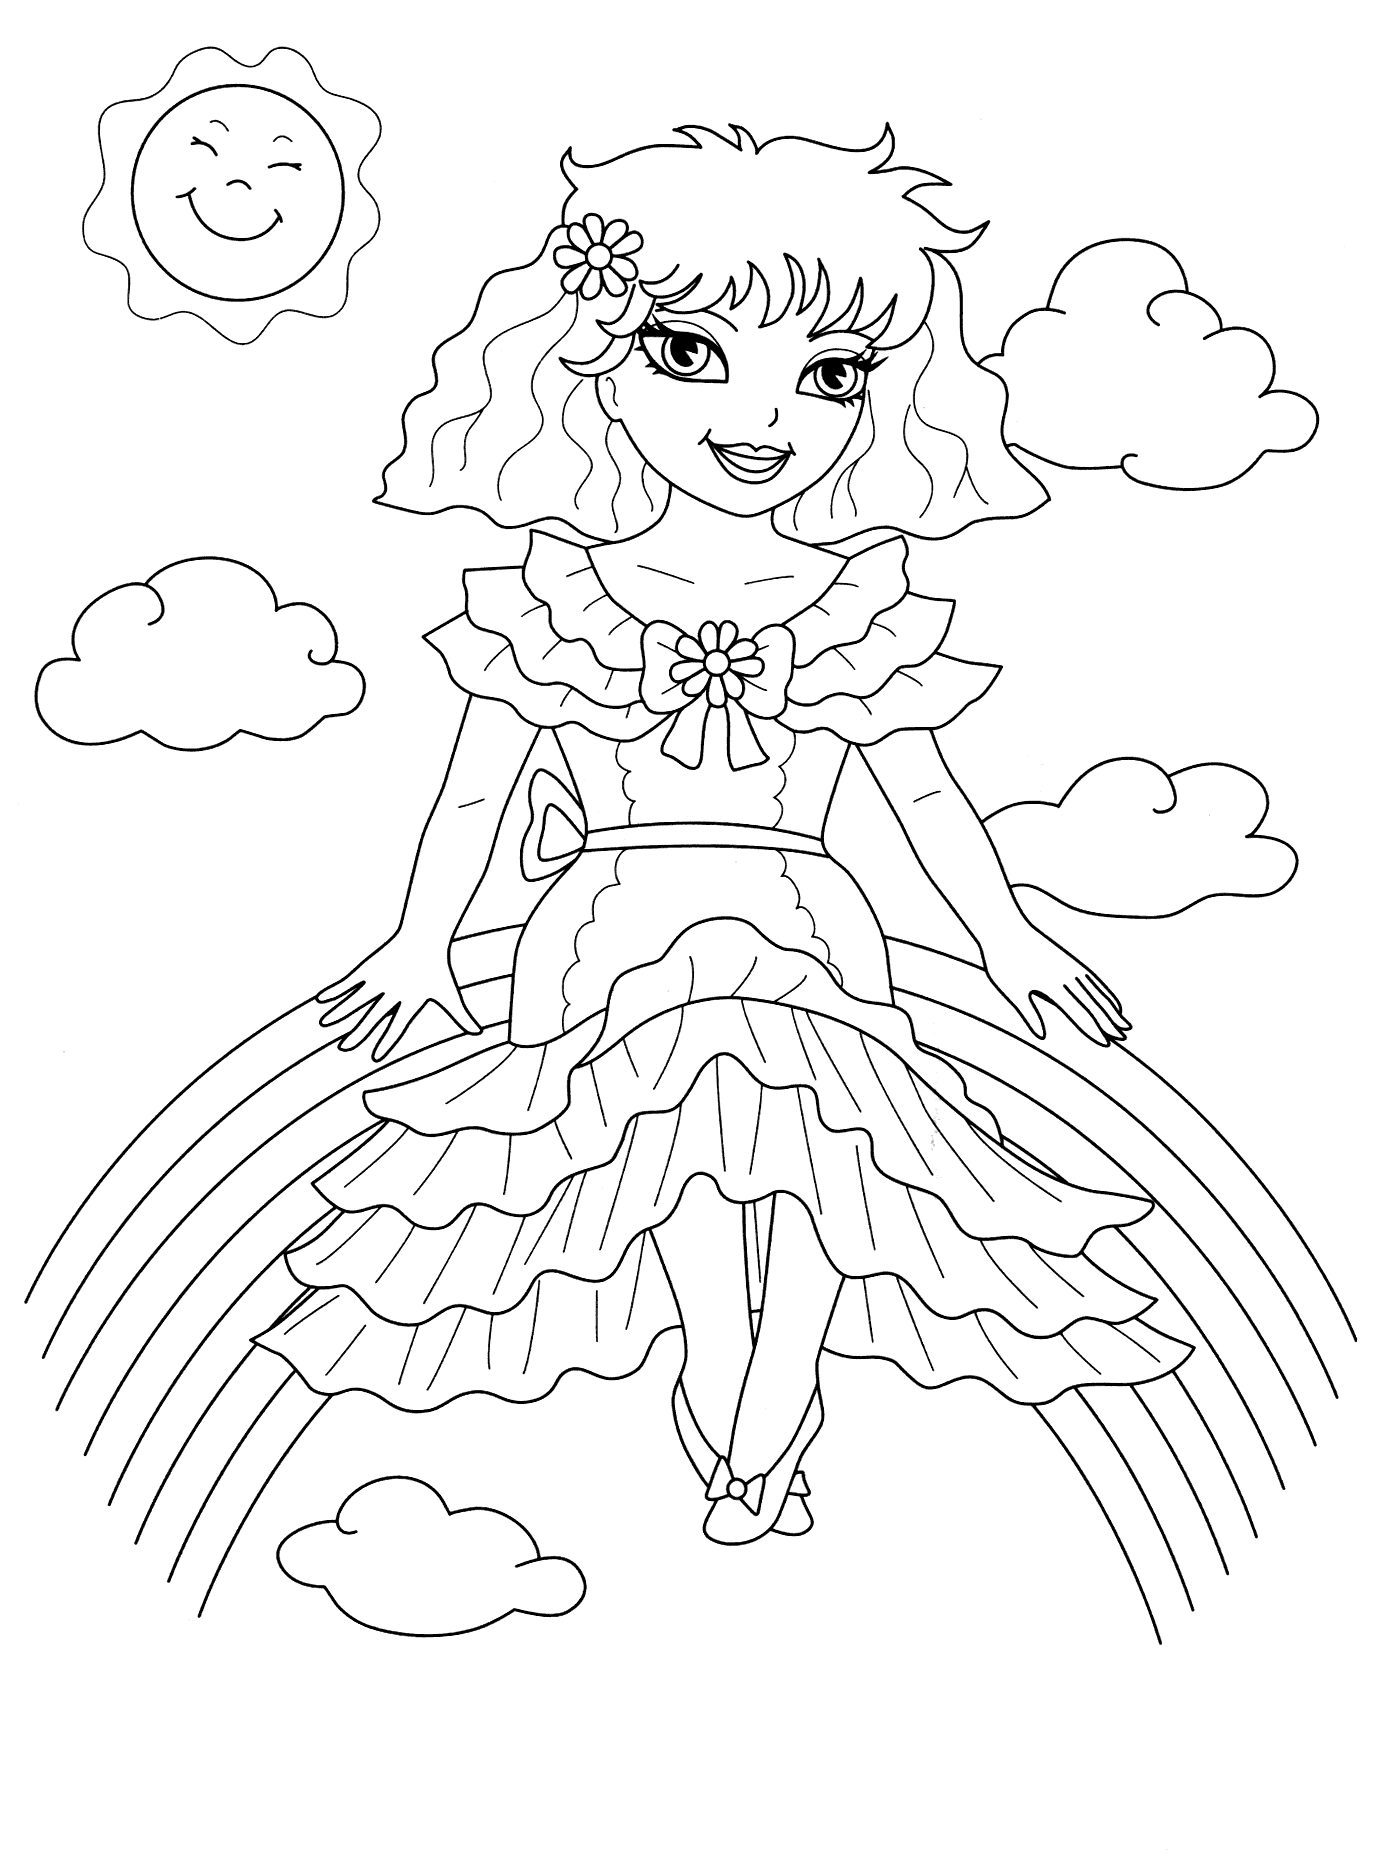 Coloring page - Rainbow Fairy